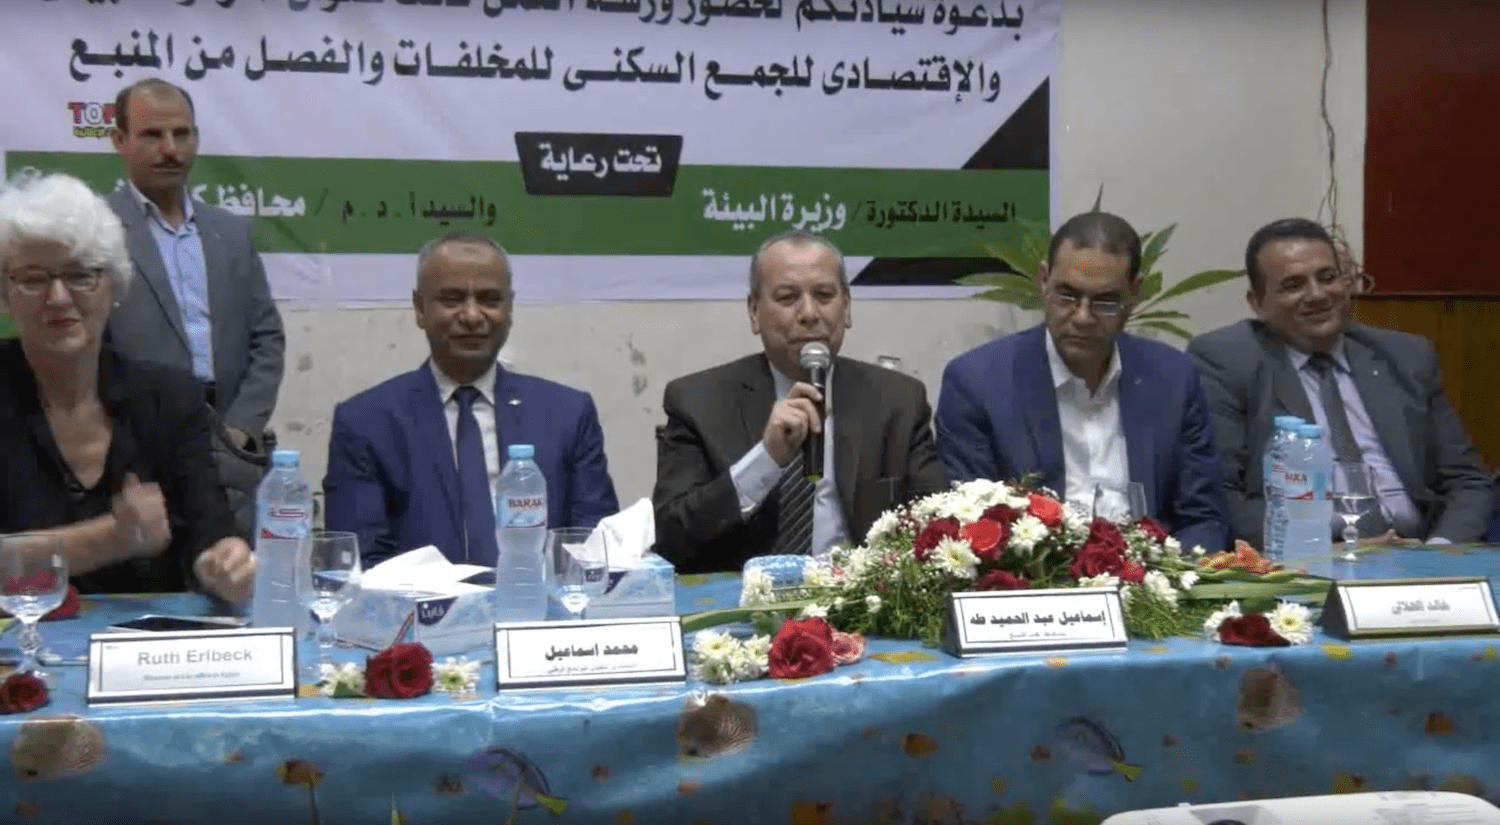 Kafr El Sheikh Governorate and NSWMP Representatives During The Announcement of Youth Companies Establishment for Household Collection and Segregation